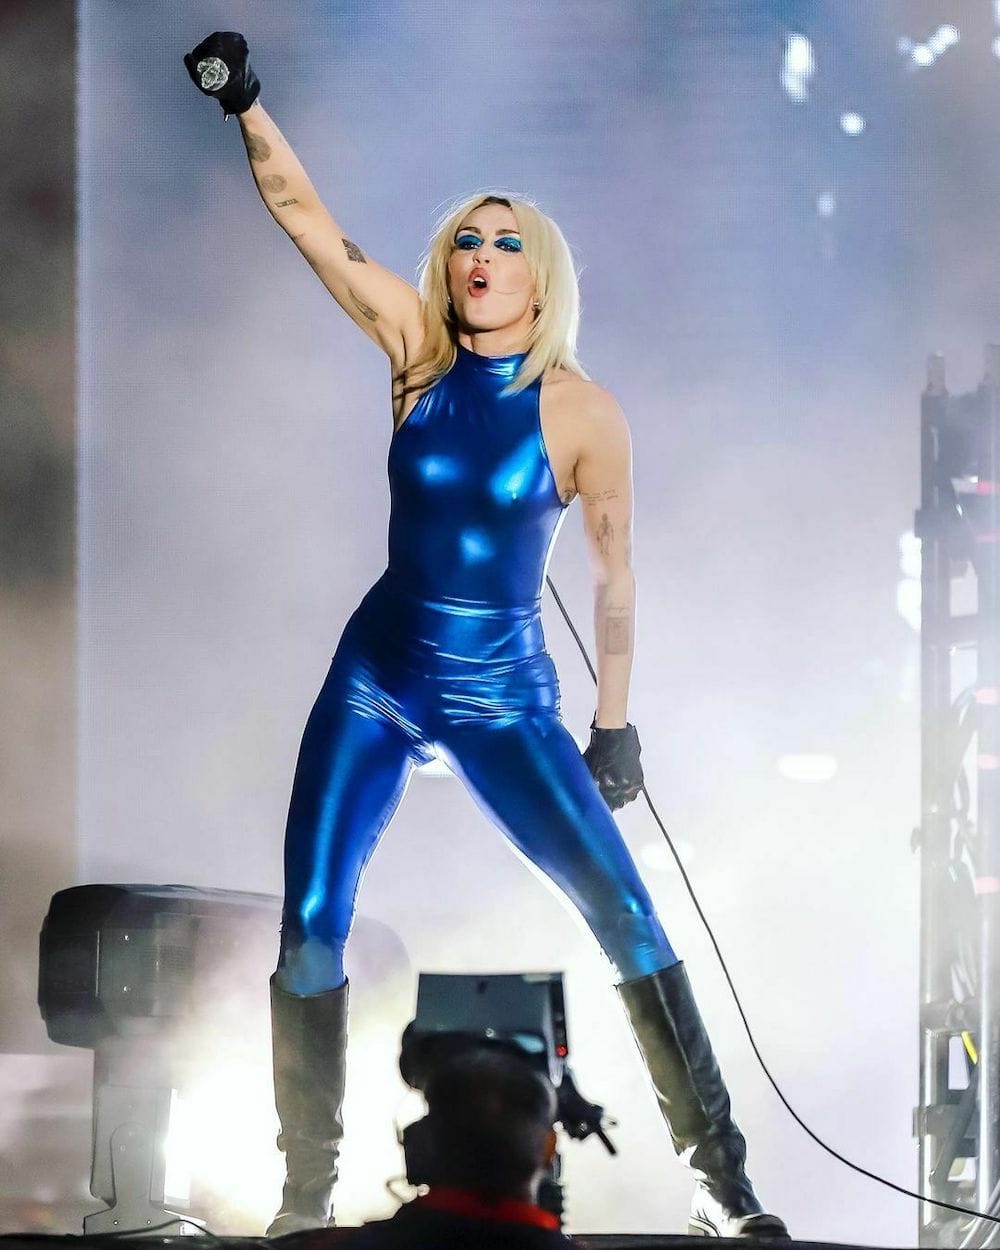 radiant-miley-cyrus-in-skintight-catsuit-at-lollapalooza-chile-day-2-in-santiago-10.jpg